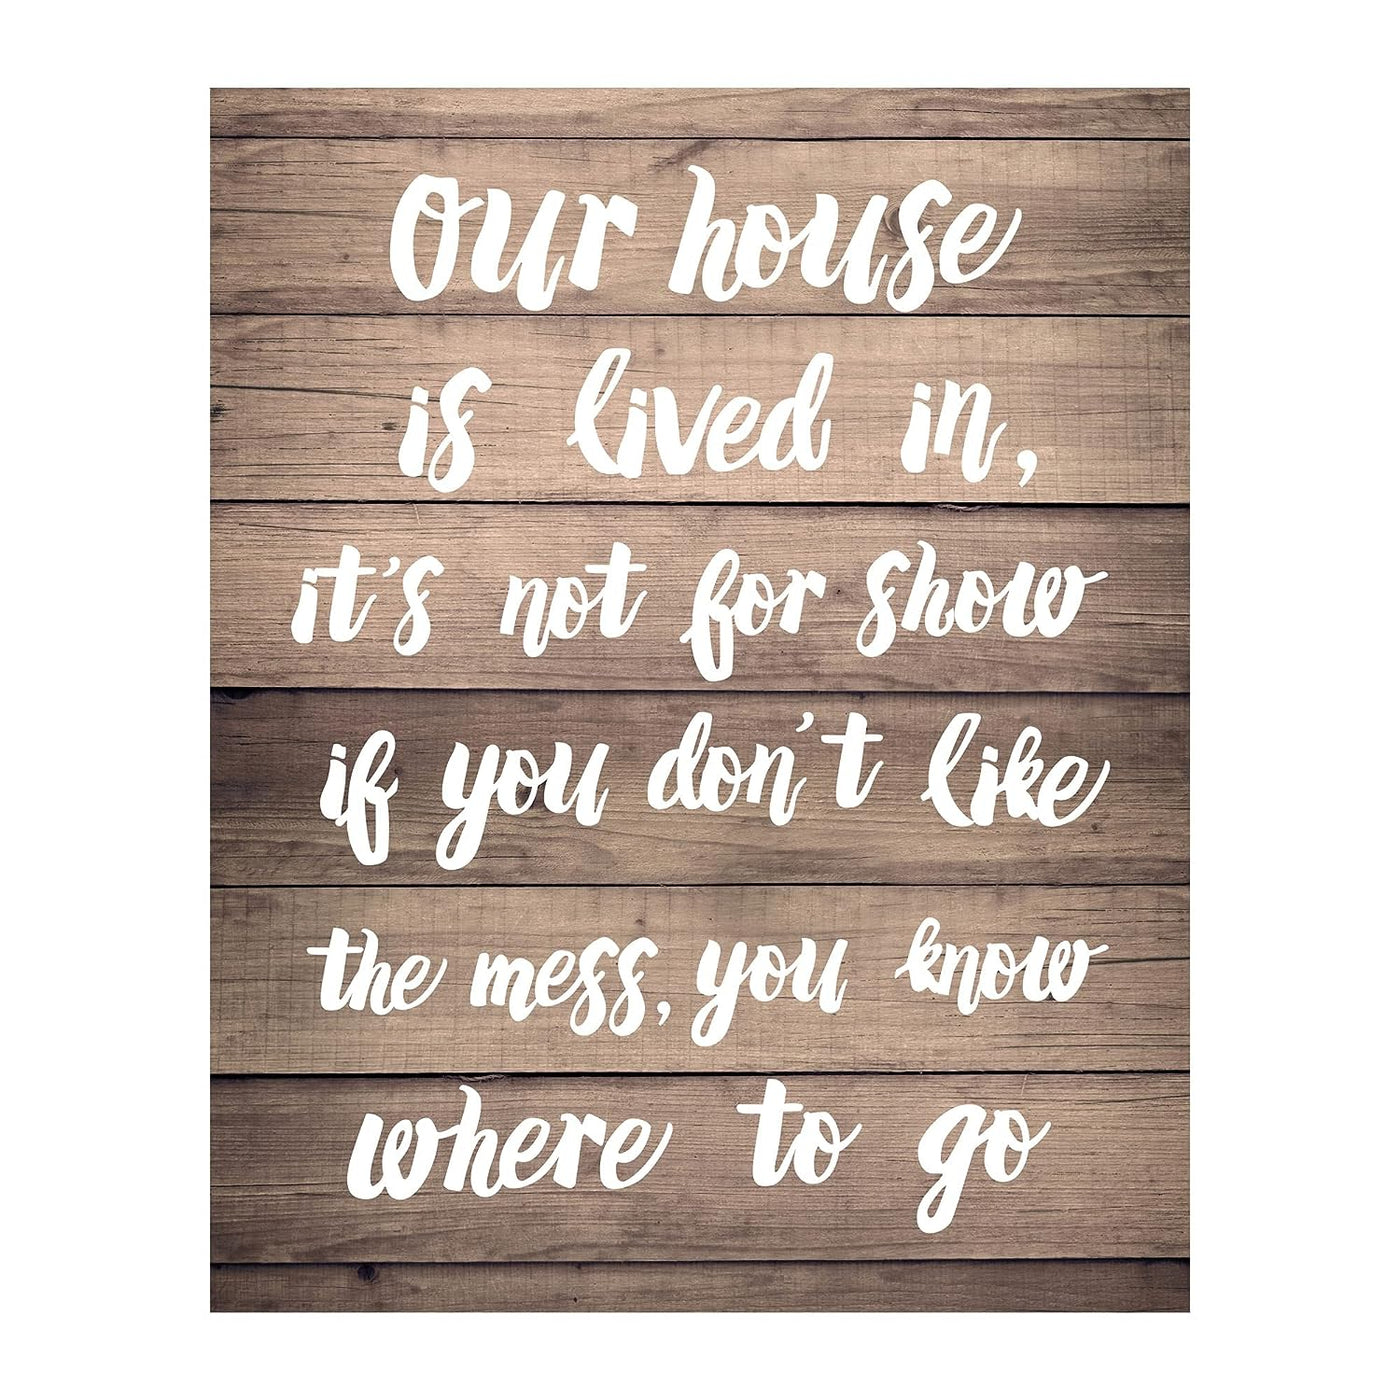 Don't Like The Mess, You Know Where To Go Funny Family Wall Sign -11 x 14" Typographic Art Print-Ready to Frame. Humorous Home-Entryway-Porch Decor. Fun Welcome Sign! Printed on Paper, Not Wood.